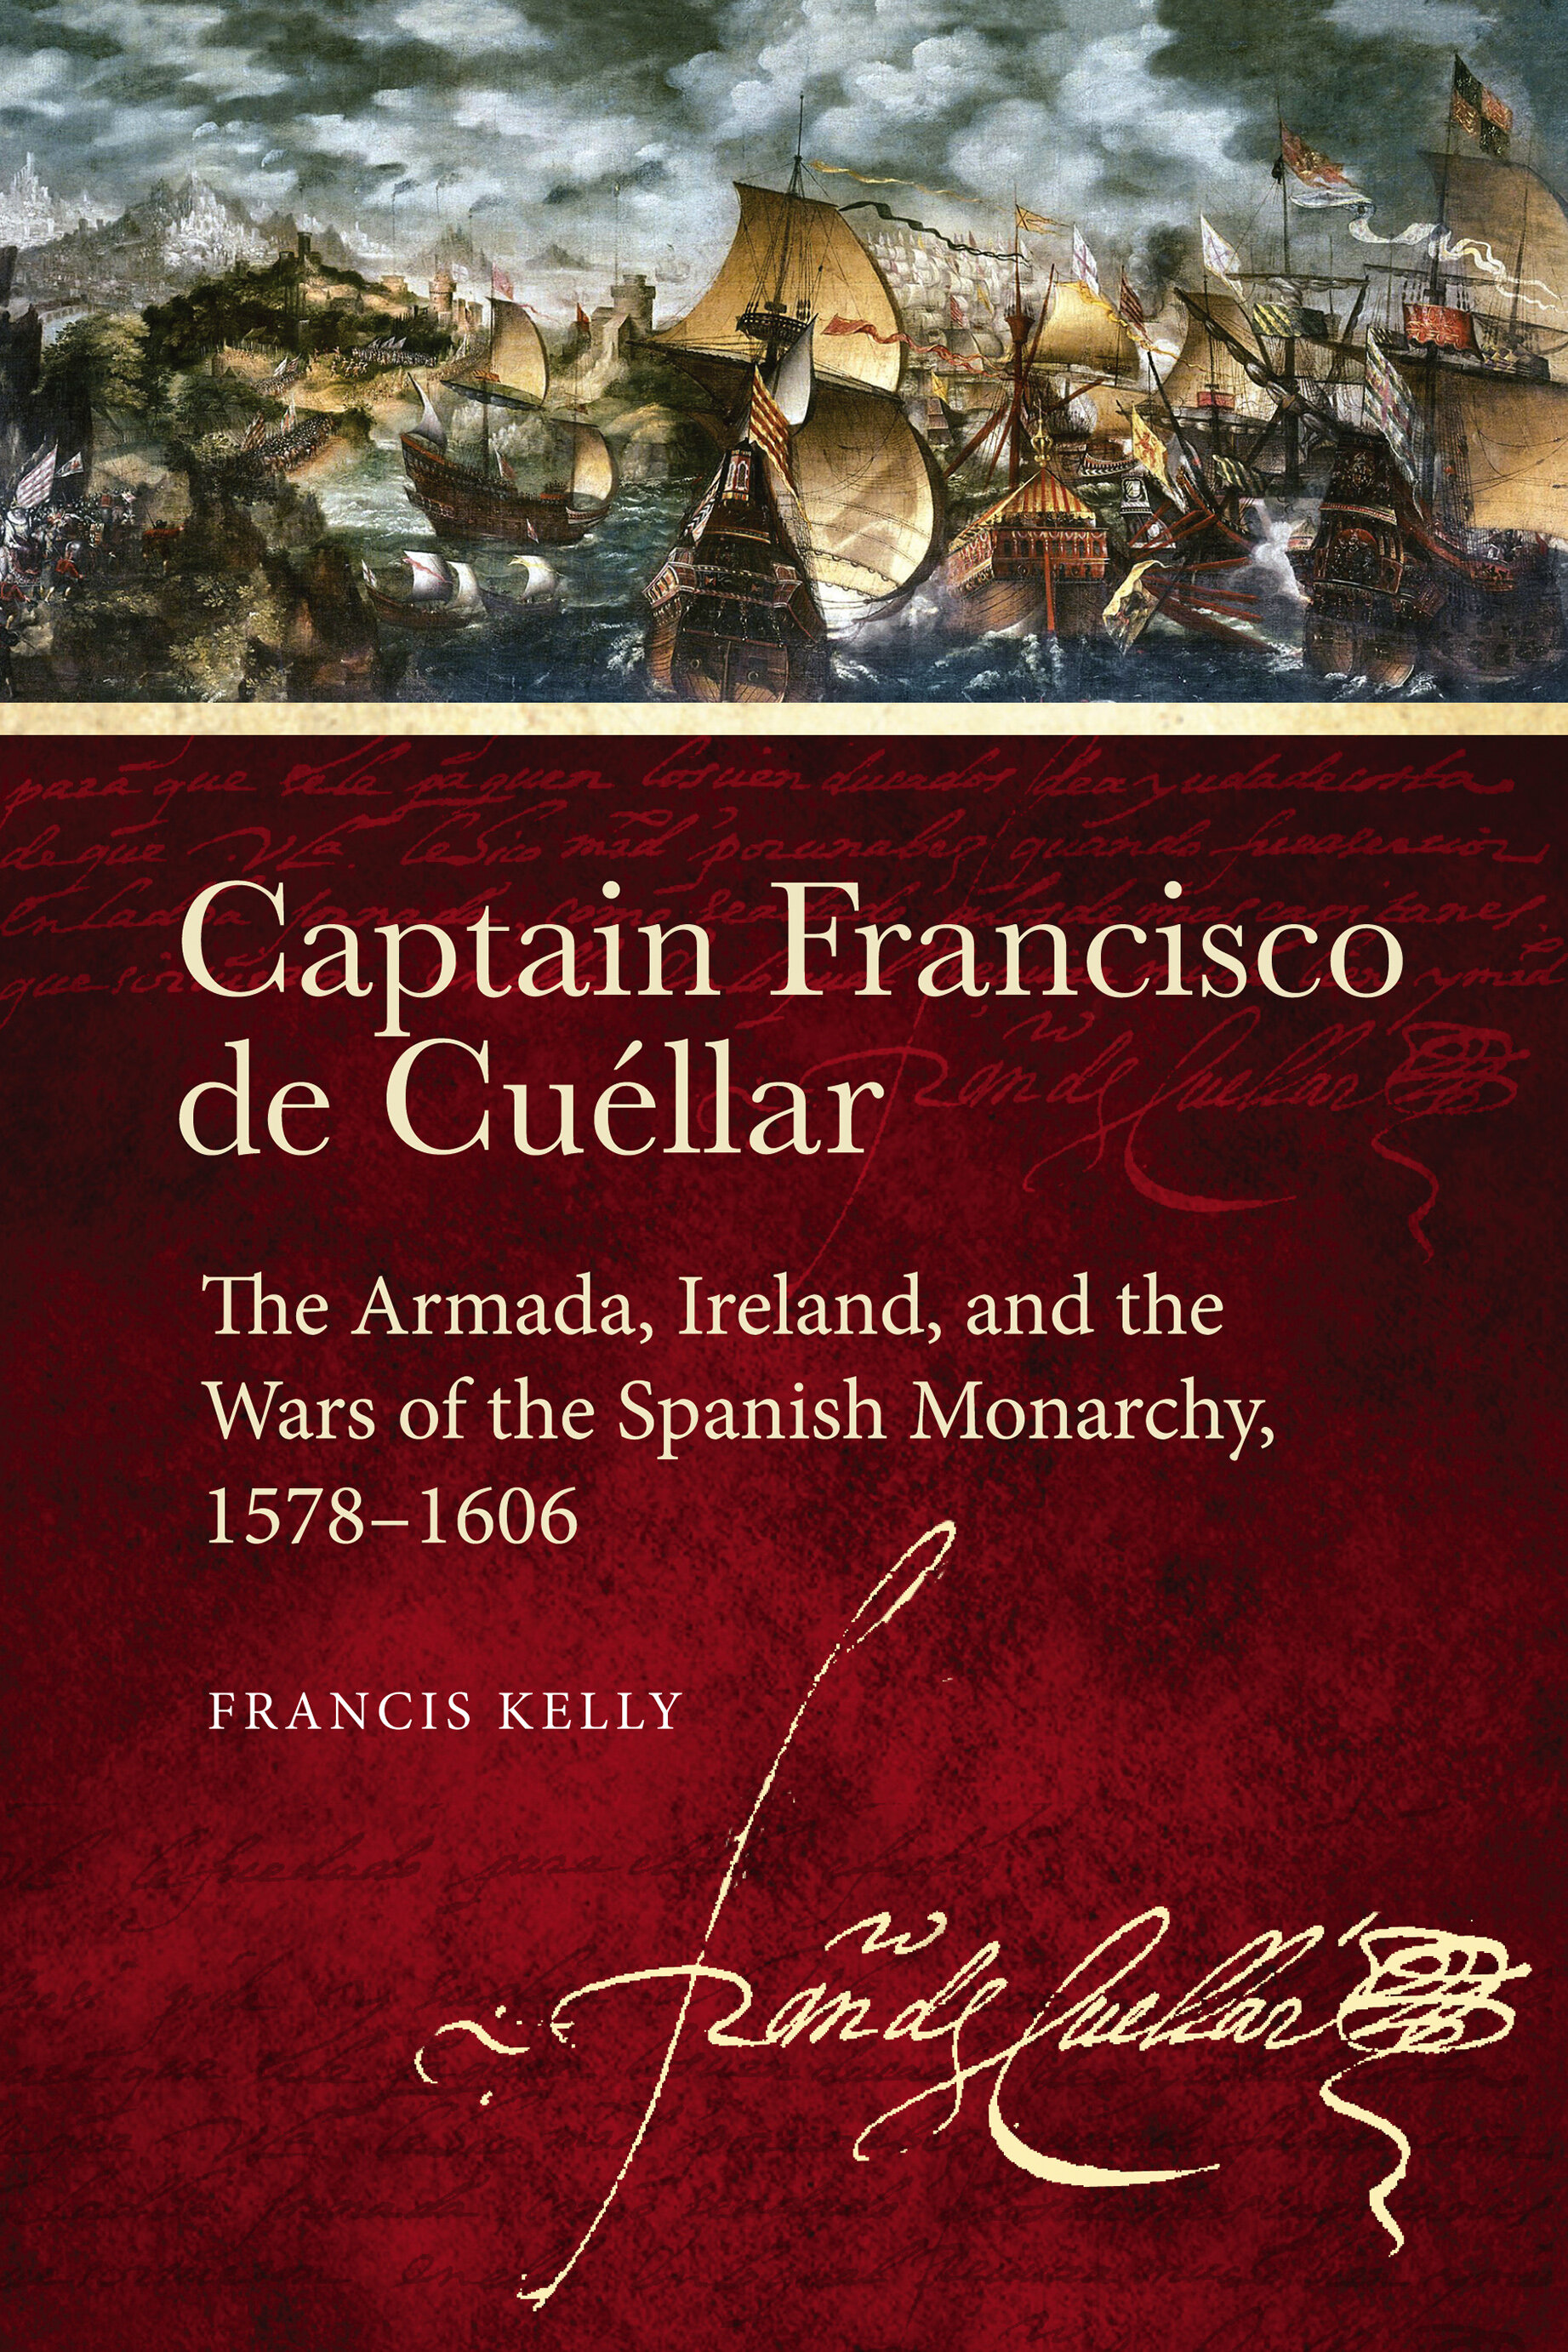 The cover of the new book on Captain de Cuéllar’s life by Francis Kelly.